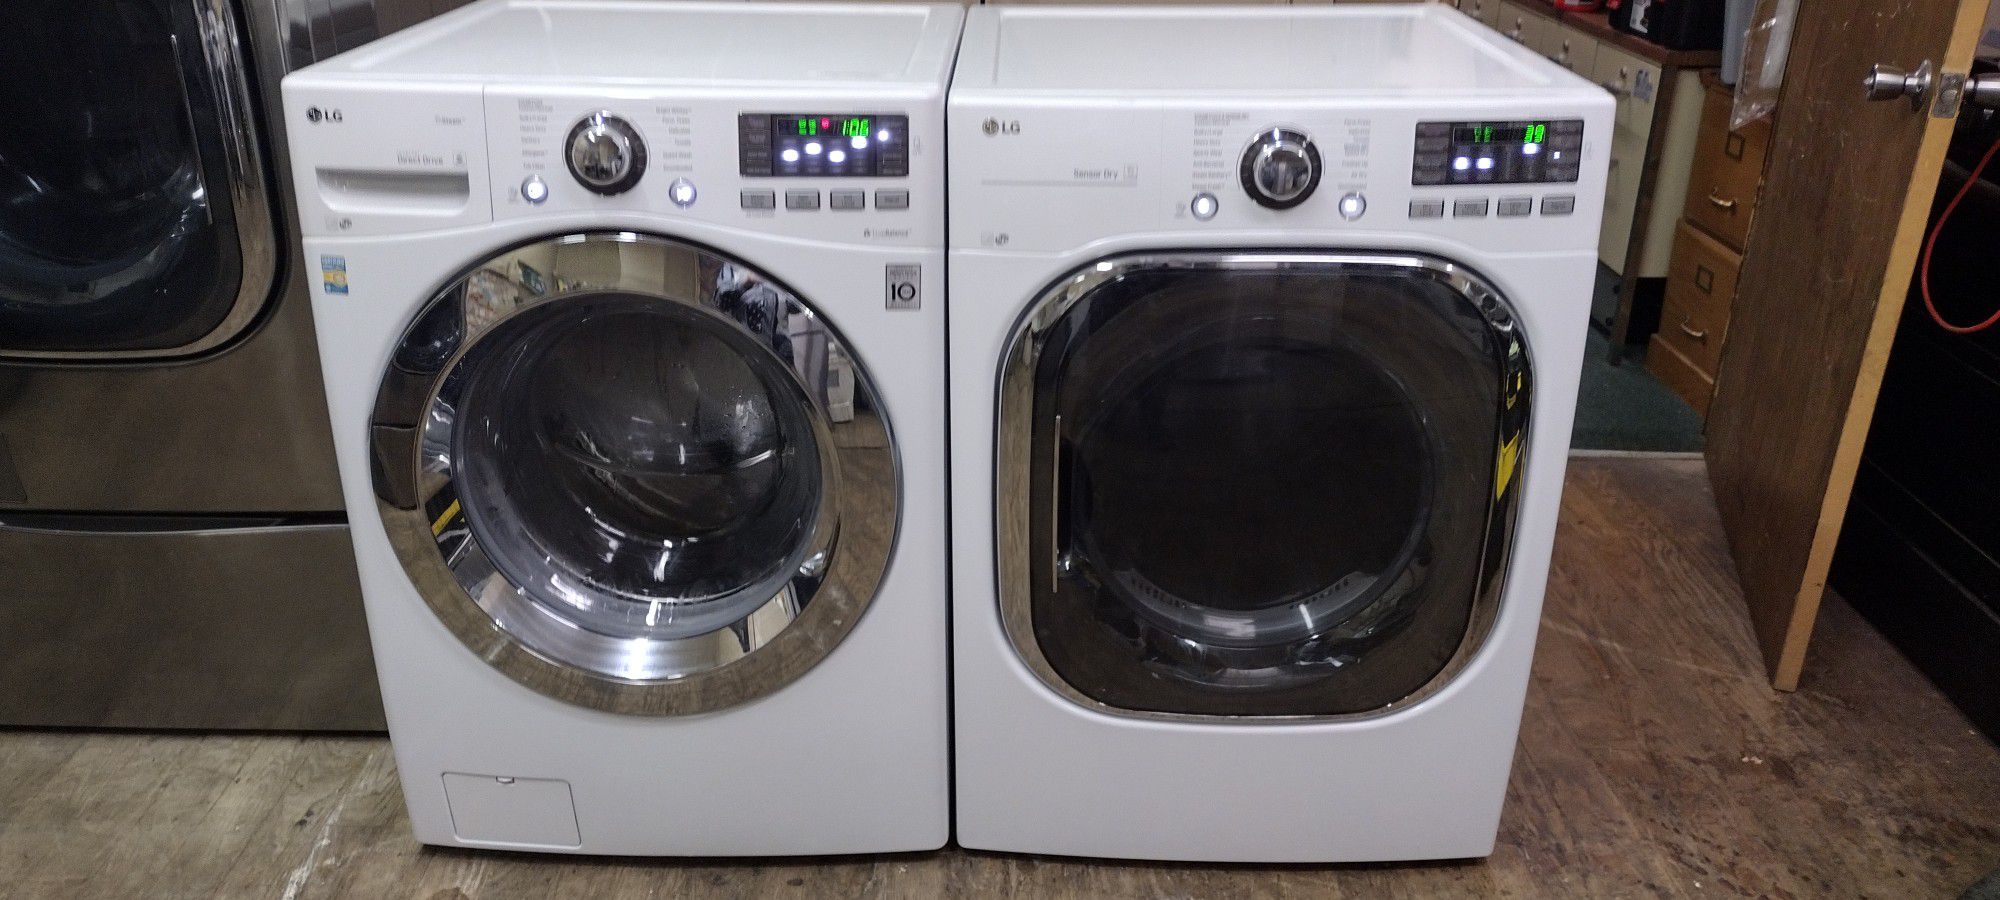 LG Elite White FrontLoad Washer & Electric Steam Dryer Set - Stackable & DownLoadable.